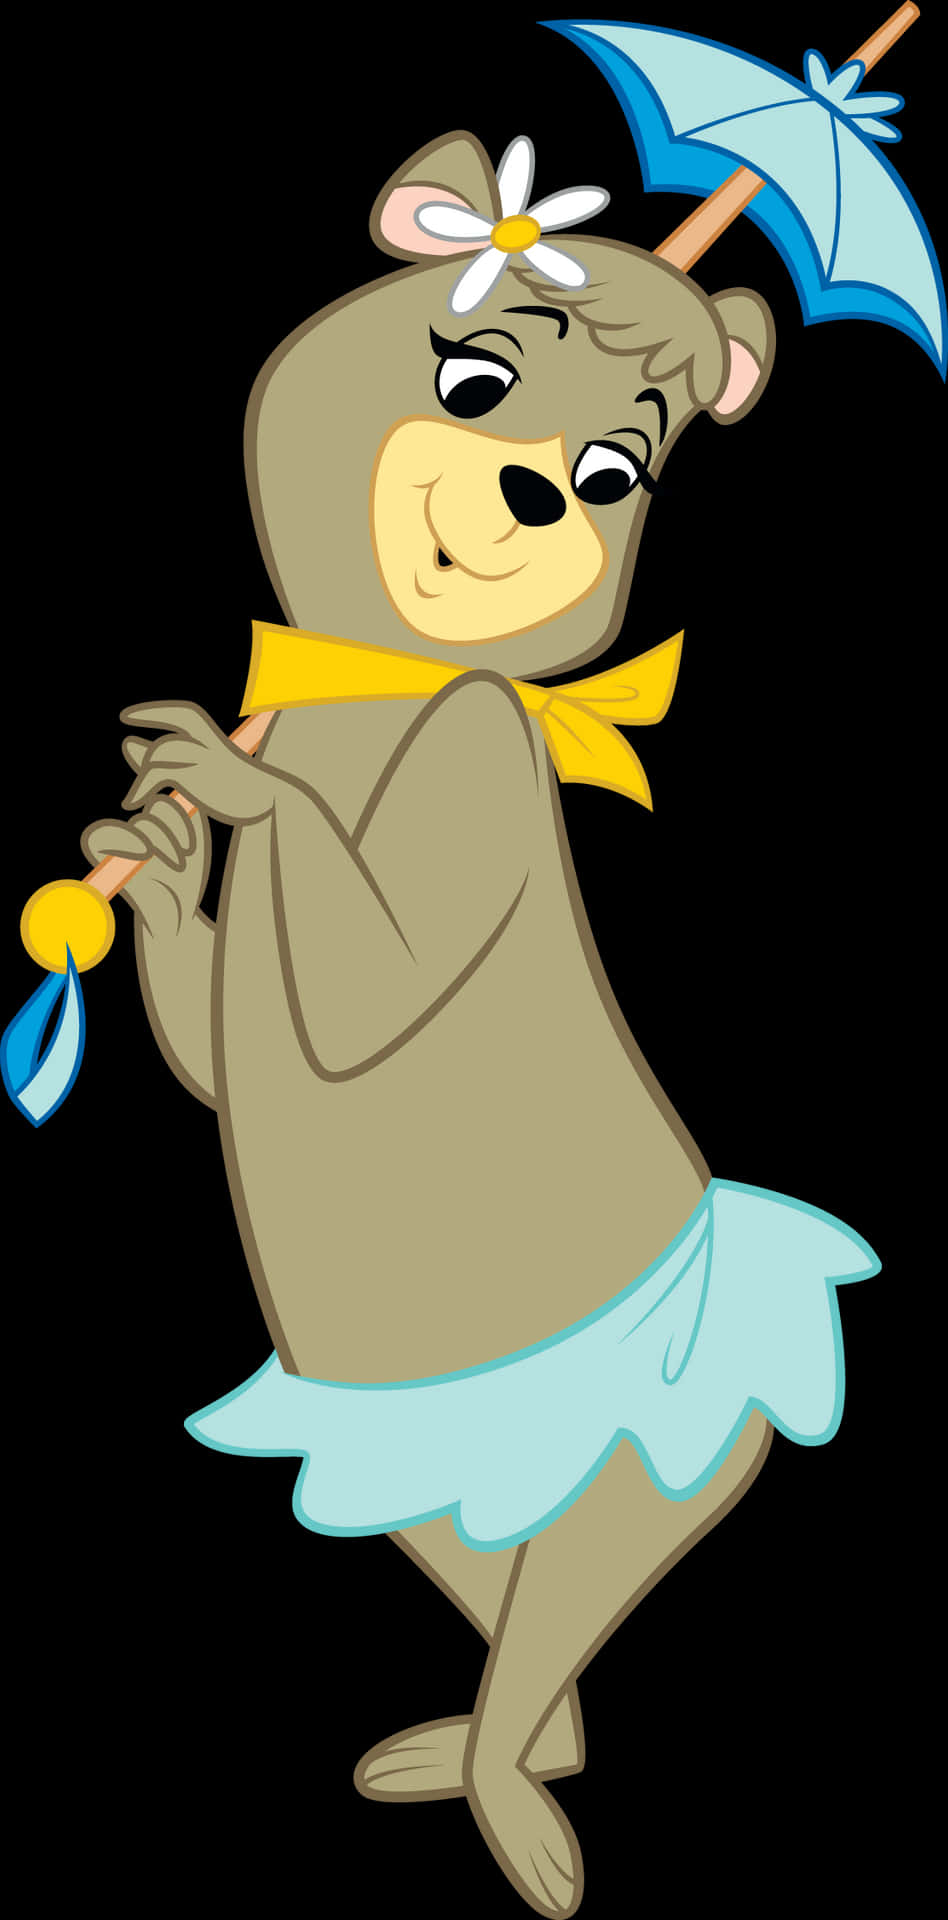 Animated Bear With Umbrella PNG